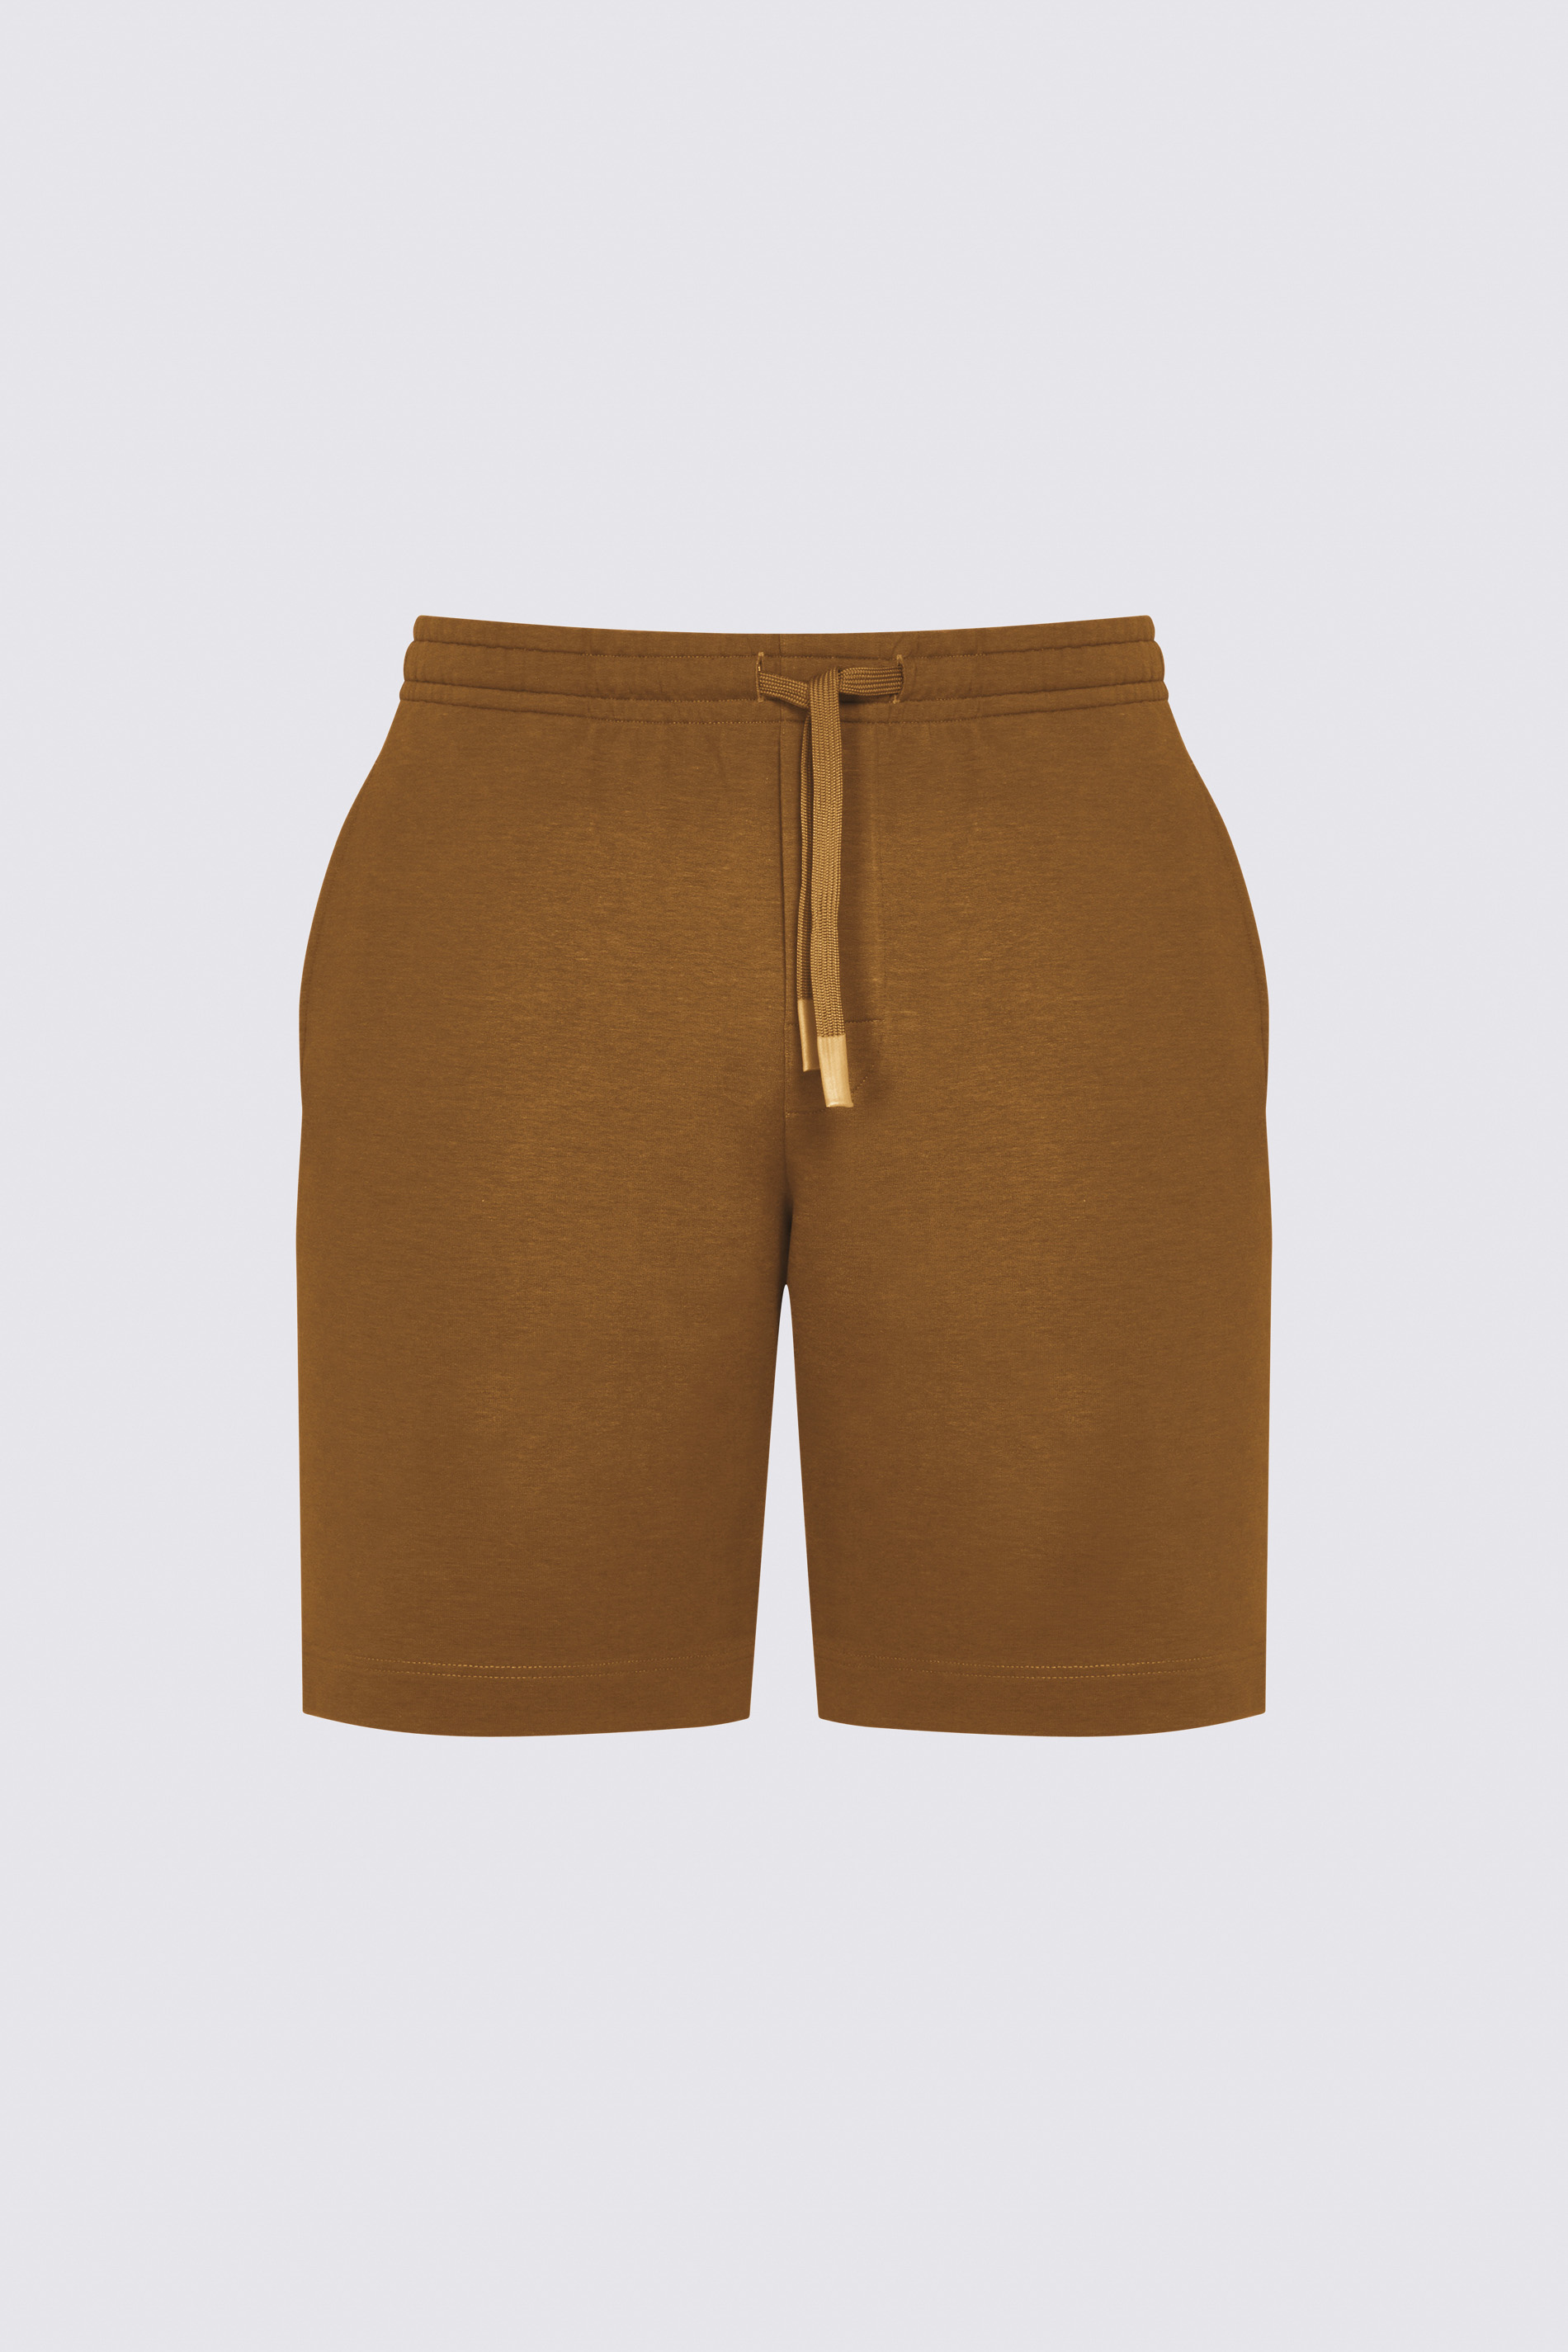 Shorts Brown Toffee Serie Enjoy Cut Out | mey®